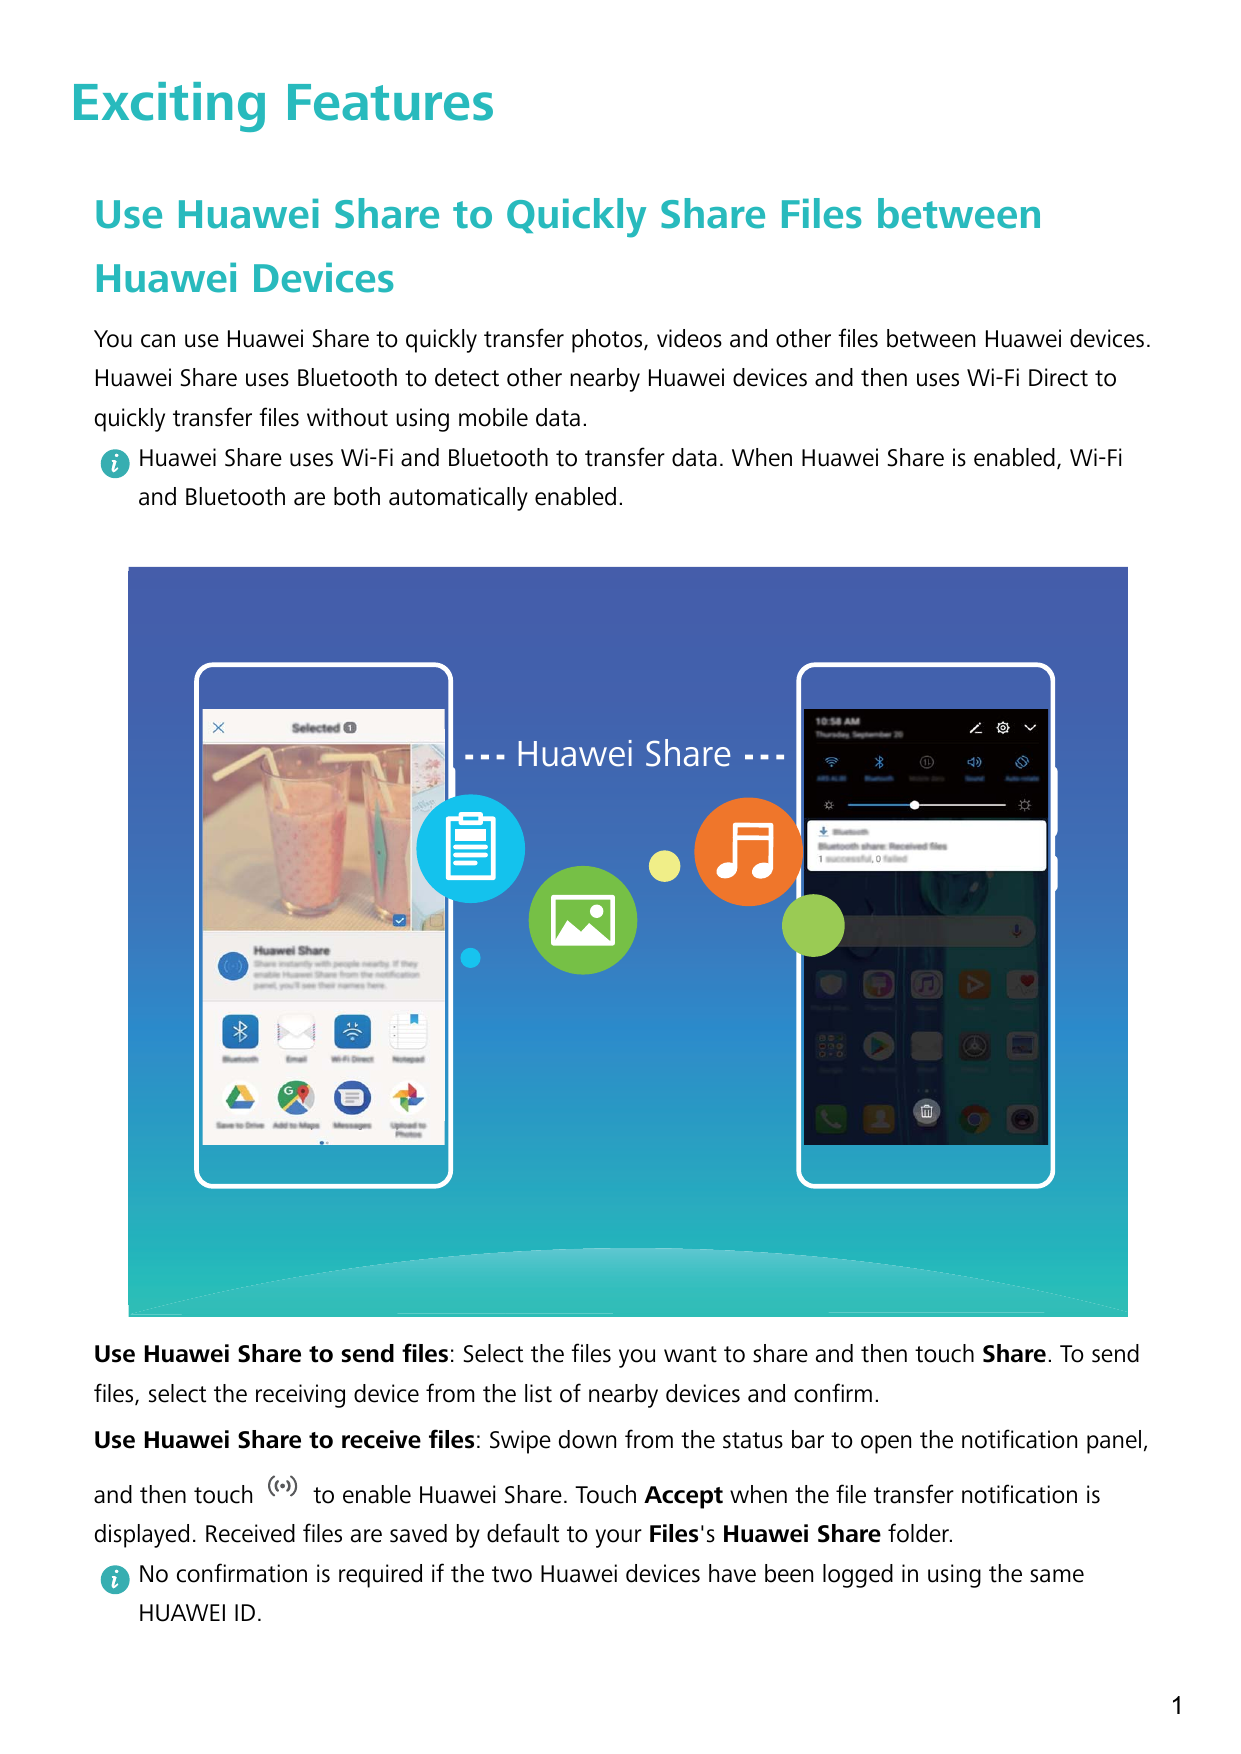 Exciting FeaturesUse Huawei Share to Quickly Share Files betweenHuawei DevicesYou can use Huawei Share to quickly transfer photo